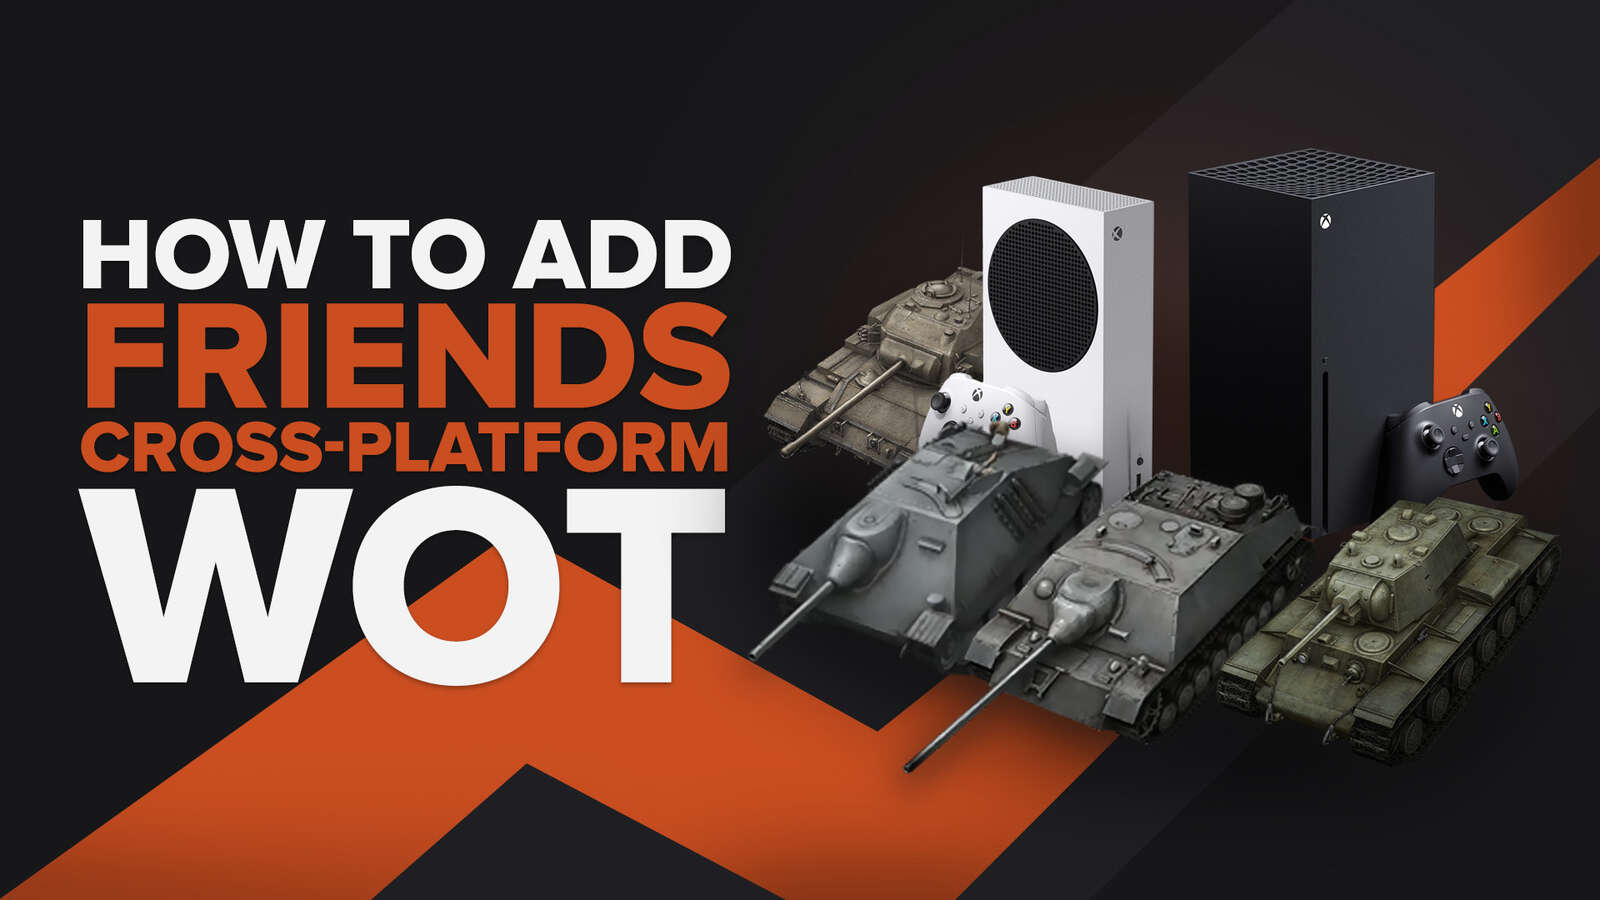 How to add Your friends cross-platform in World of Tanks